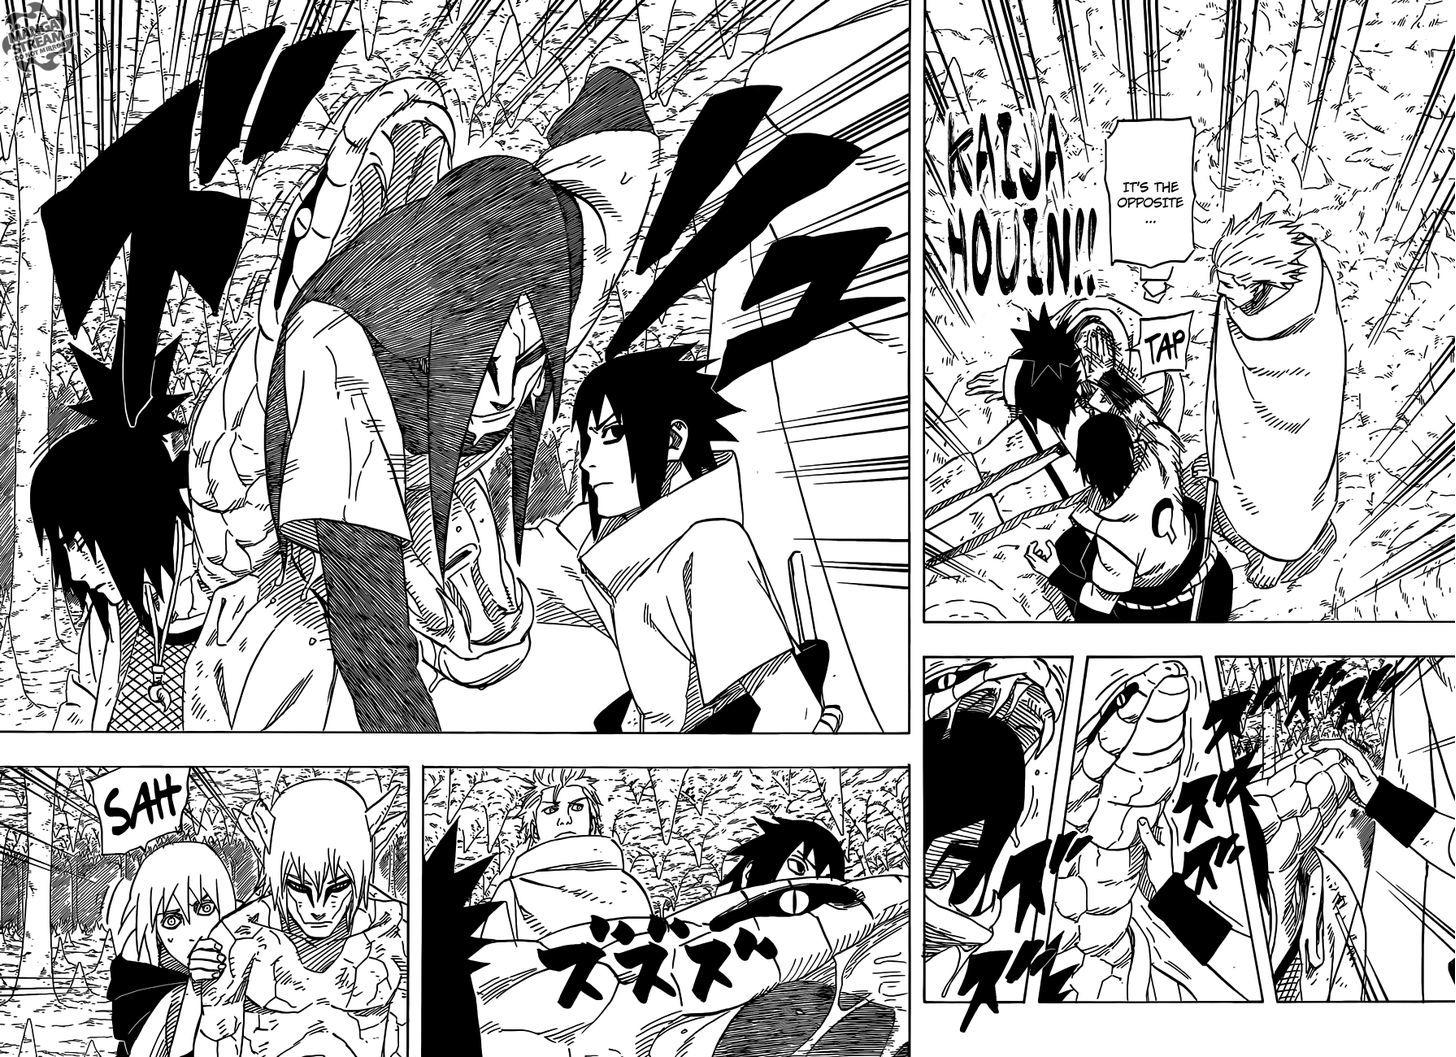 Vol.62 Chapter 593 – Orochimaru’s Revival | 6 page